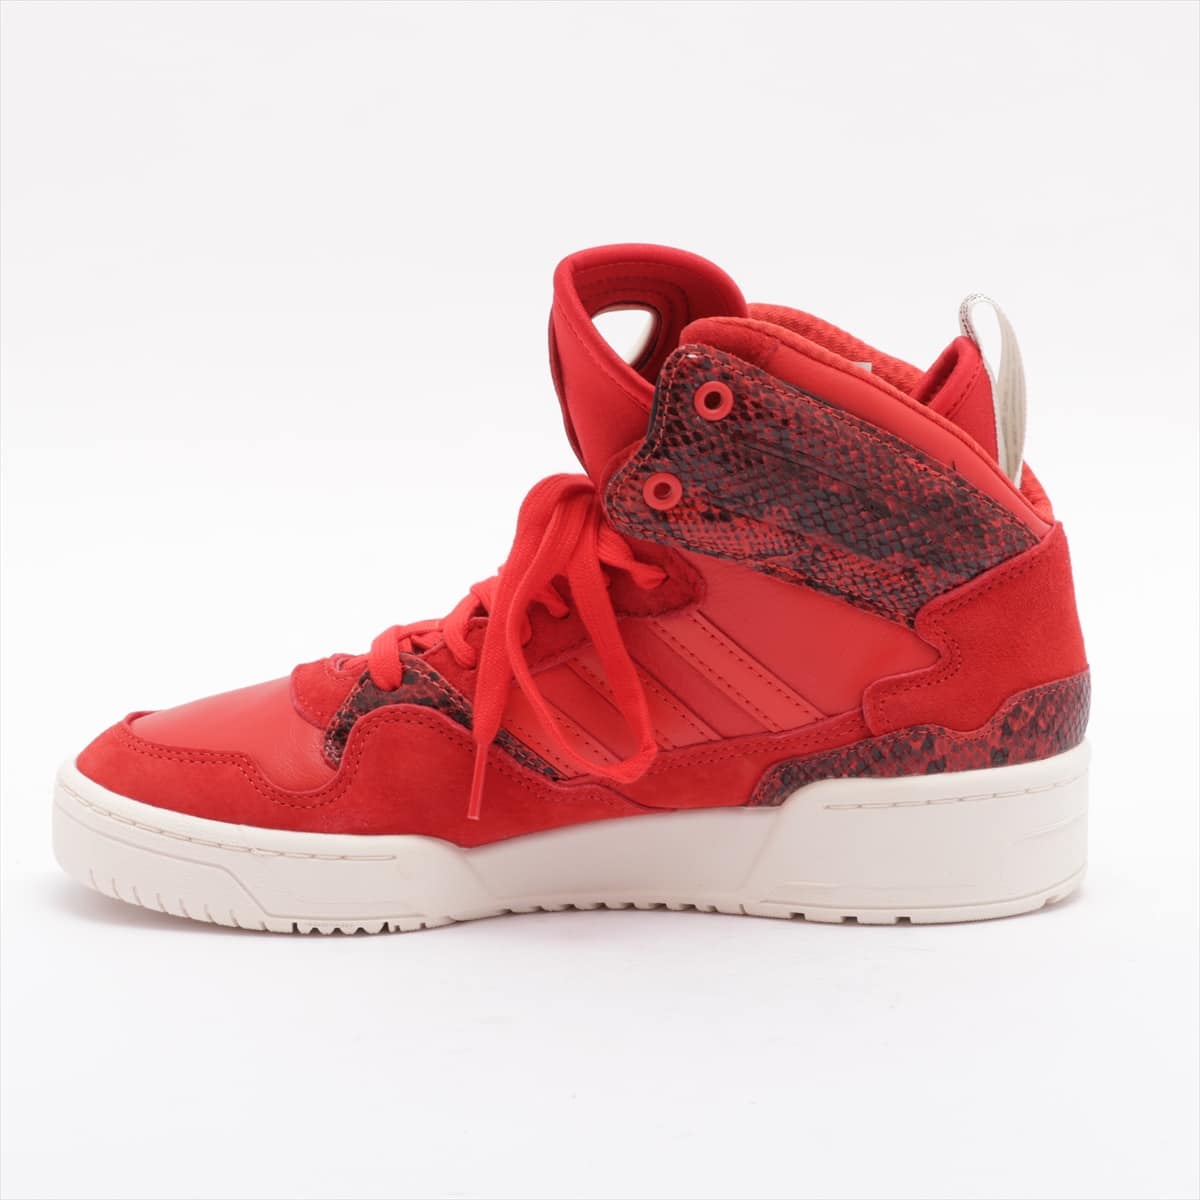 Adidas Leather Sneakers 26.5㎝ Men's Red